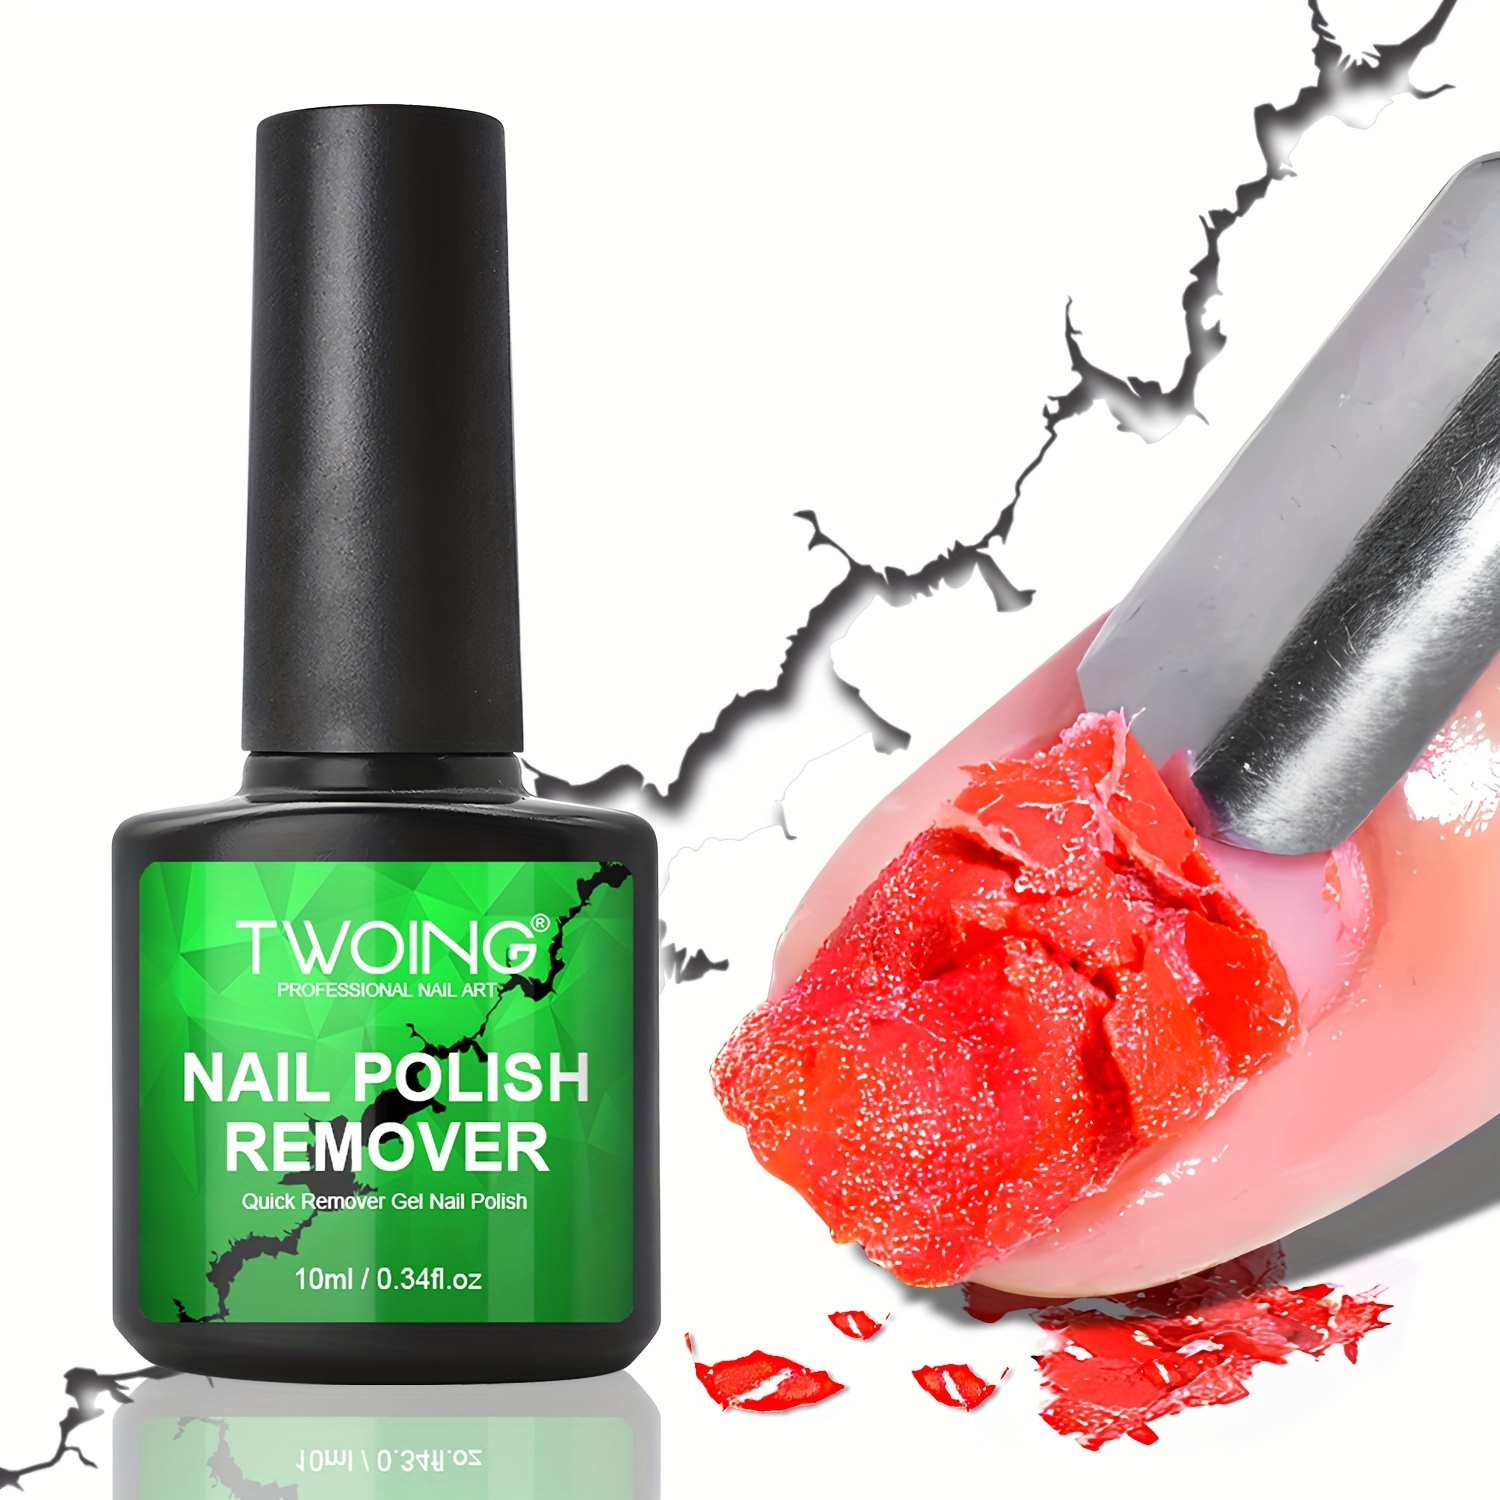 

Professional Nail Art Gel Nail Polish Remover: Quickly & Easily Removes Uv Gel Polishes Within 2-3 Minutes, Magic Soak-off Quick Nail Glue Remover No Need To Soak Or Wrap Nails